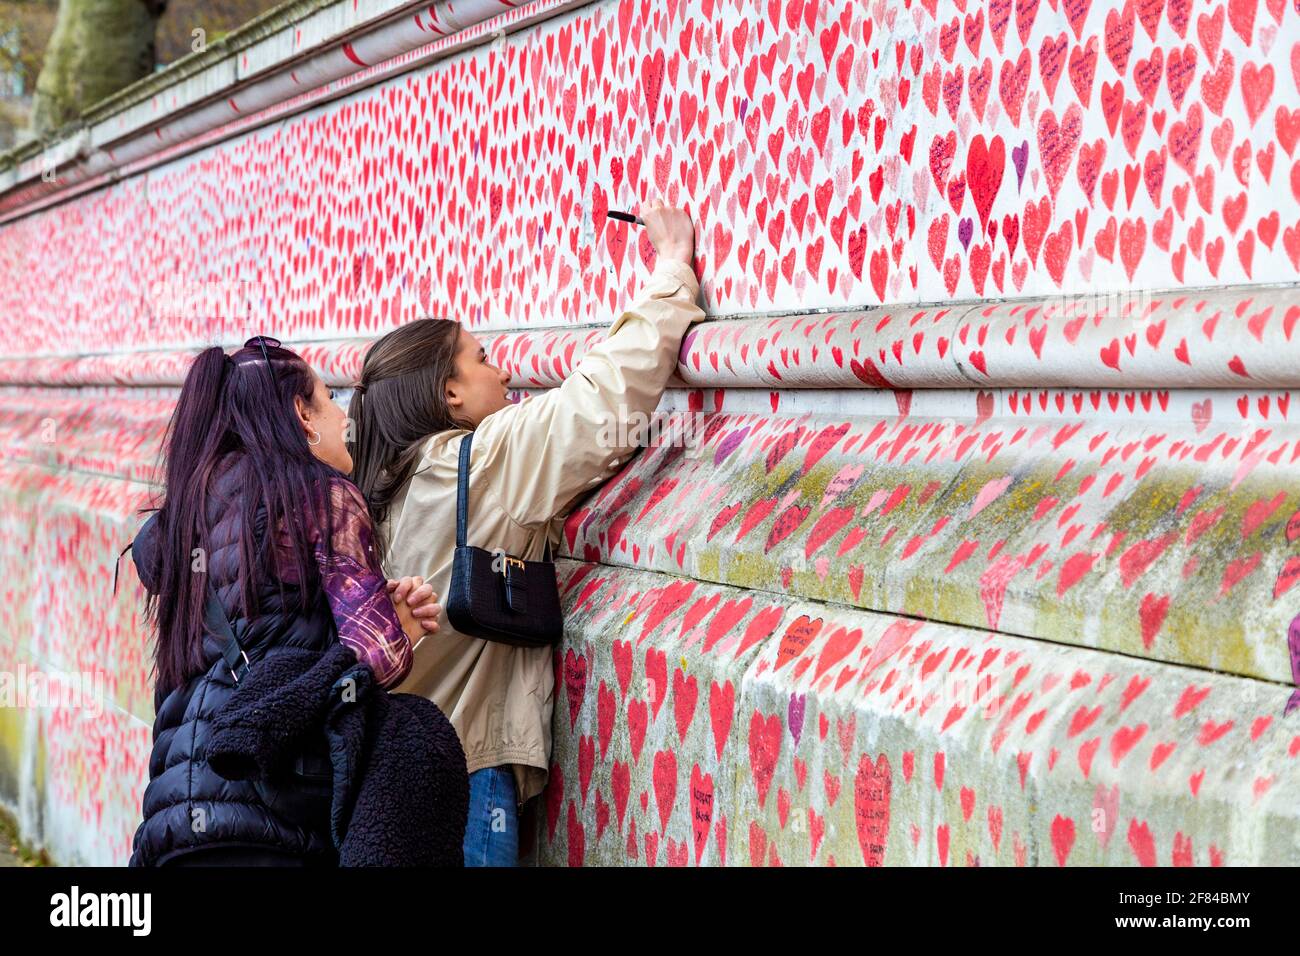 11 April 2021, London, UK - Woman signing The National COVID Memorial Wall on the South Bank which has hearts drawn and names of those who died in the coronavirus pandemic Stock Photo